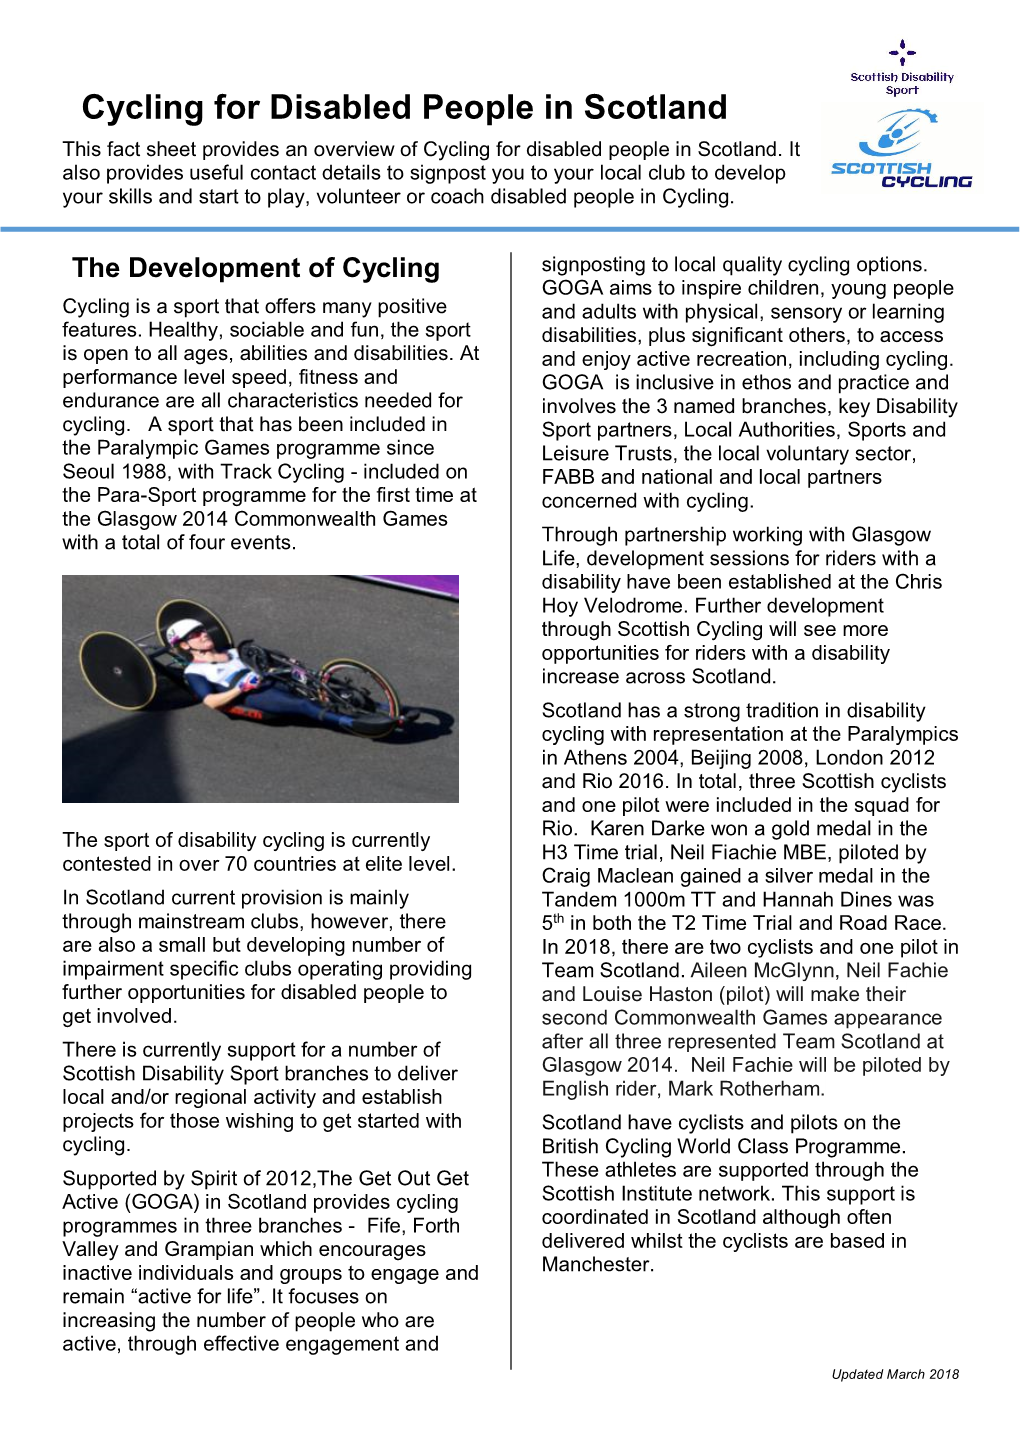 Cycling for Disabled People in Scotland This Fact Sheet Provides an Overview of Cycling for Disabled People in Scotland